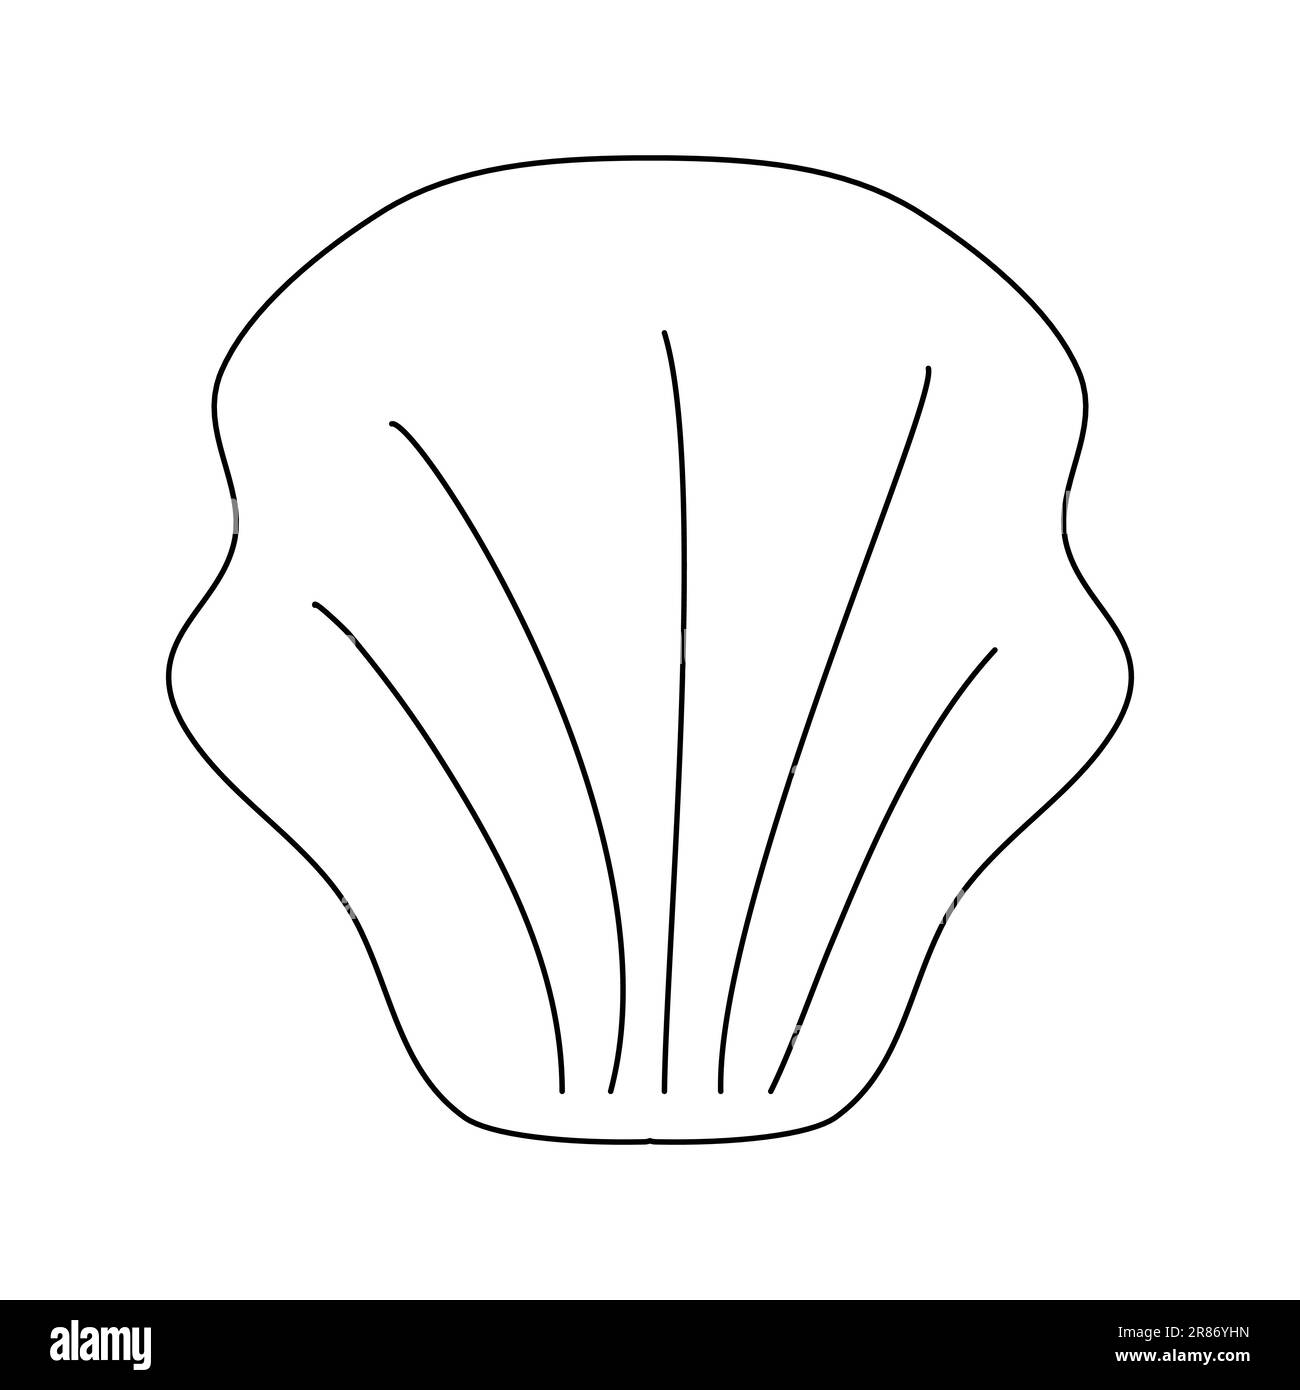 Scallop seashell, doodle style flat vector outline illustration for kids coloring book Stock Vector